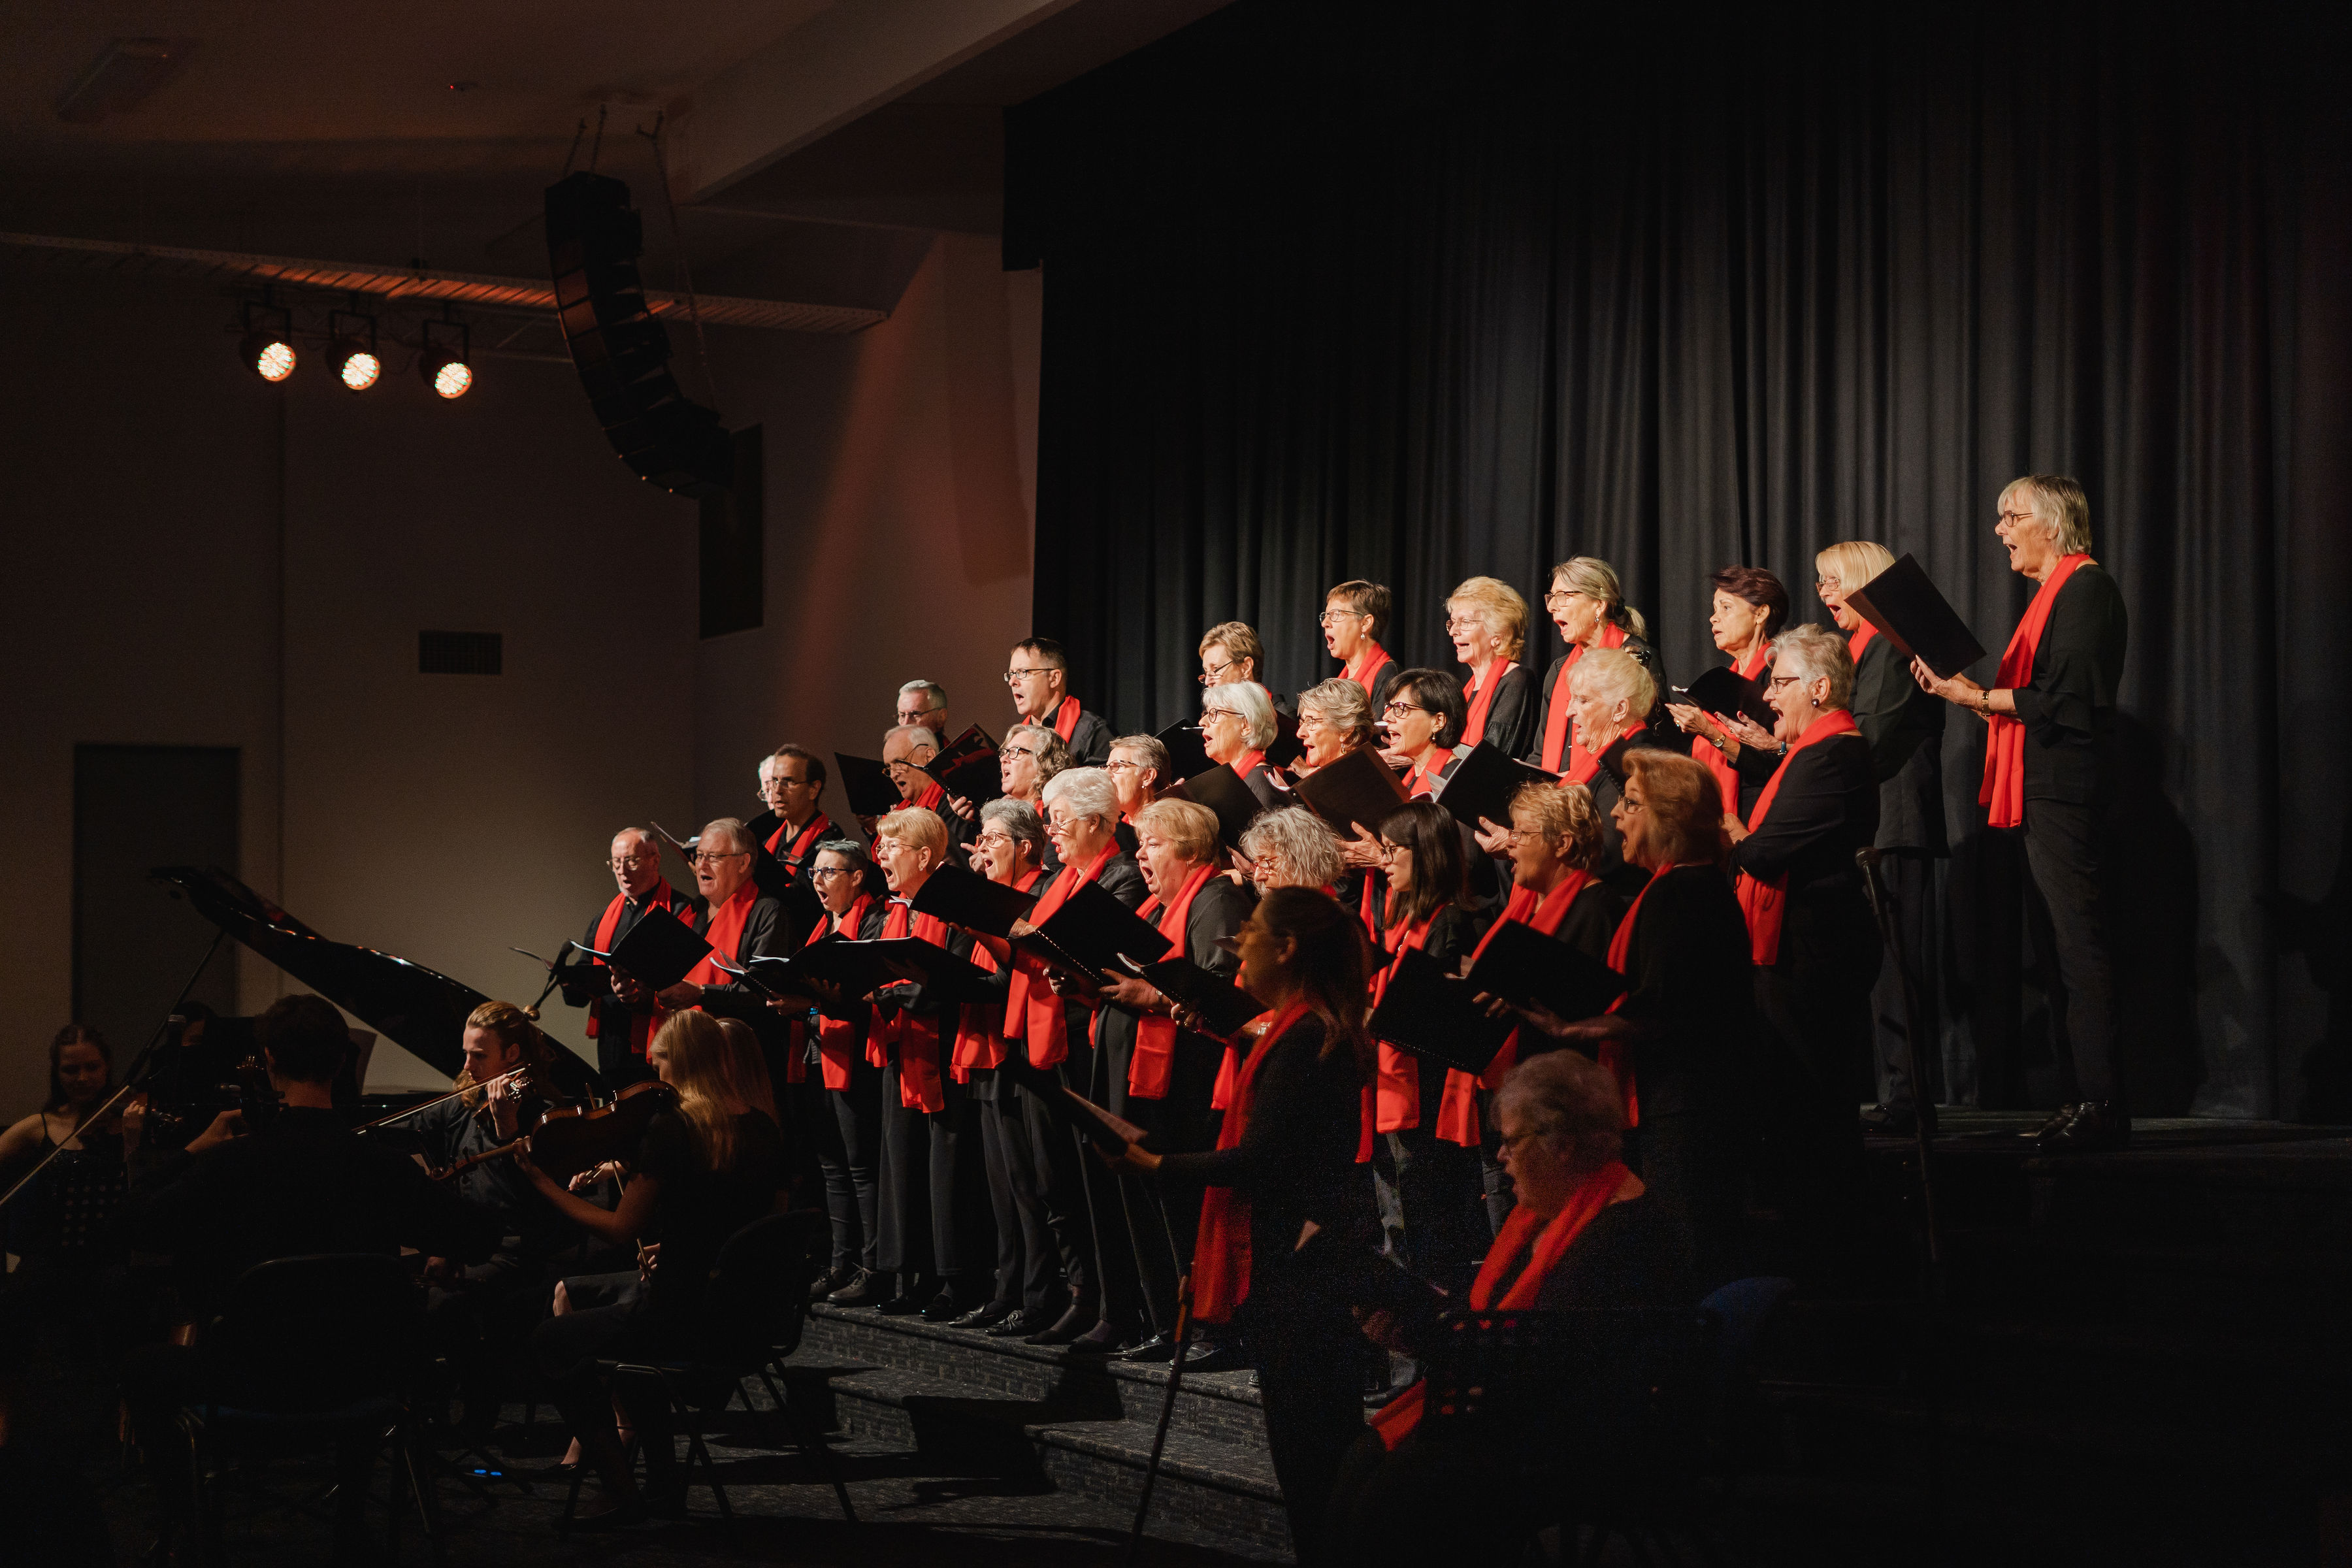 Choir singing in The Land Changes On concert